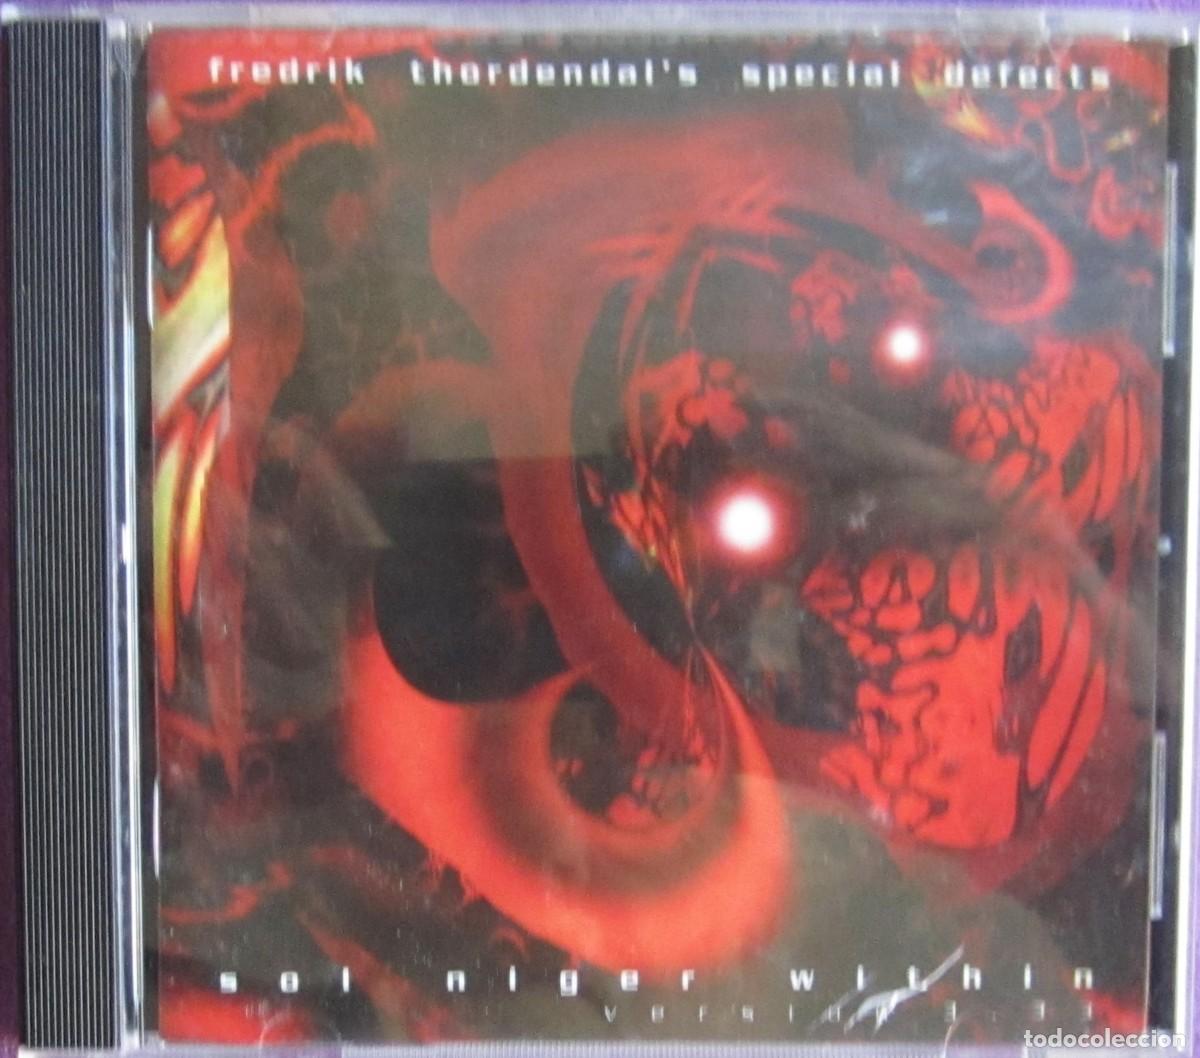 fredrik thordendal´s special defects: sol niger - Buy CD's of